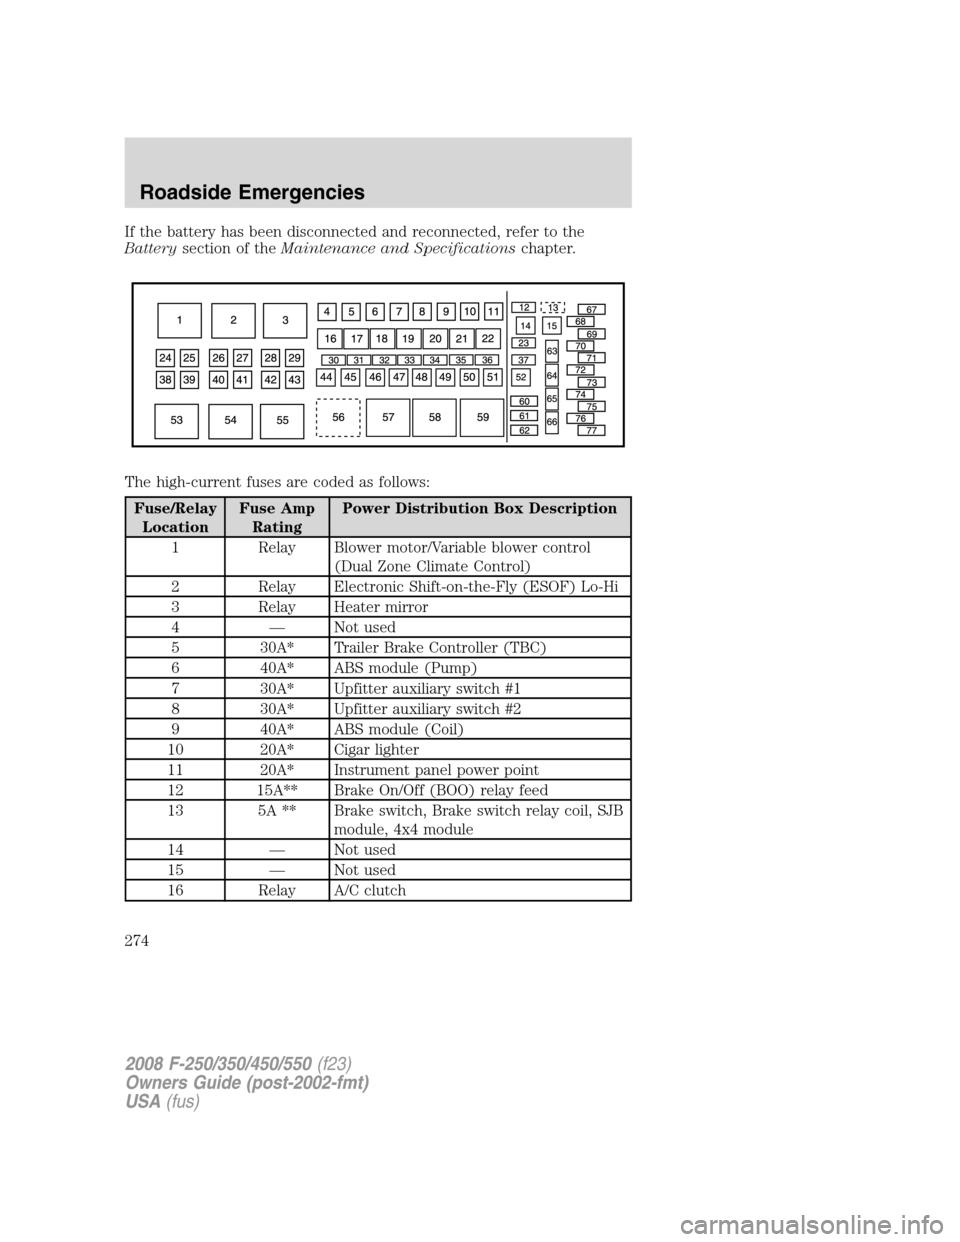 FORD SUPER DUTY 2008 2.G Owners Manual If the battery has been disconnected and reconnected, refer to the
Batterysection of theMaintenance and Specificationschapter.
The high-current fuses are coded as follows:
Fuse/Relay
LocationFuse Amp
